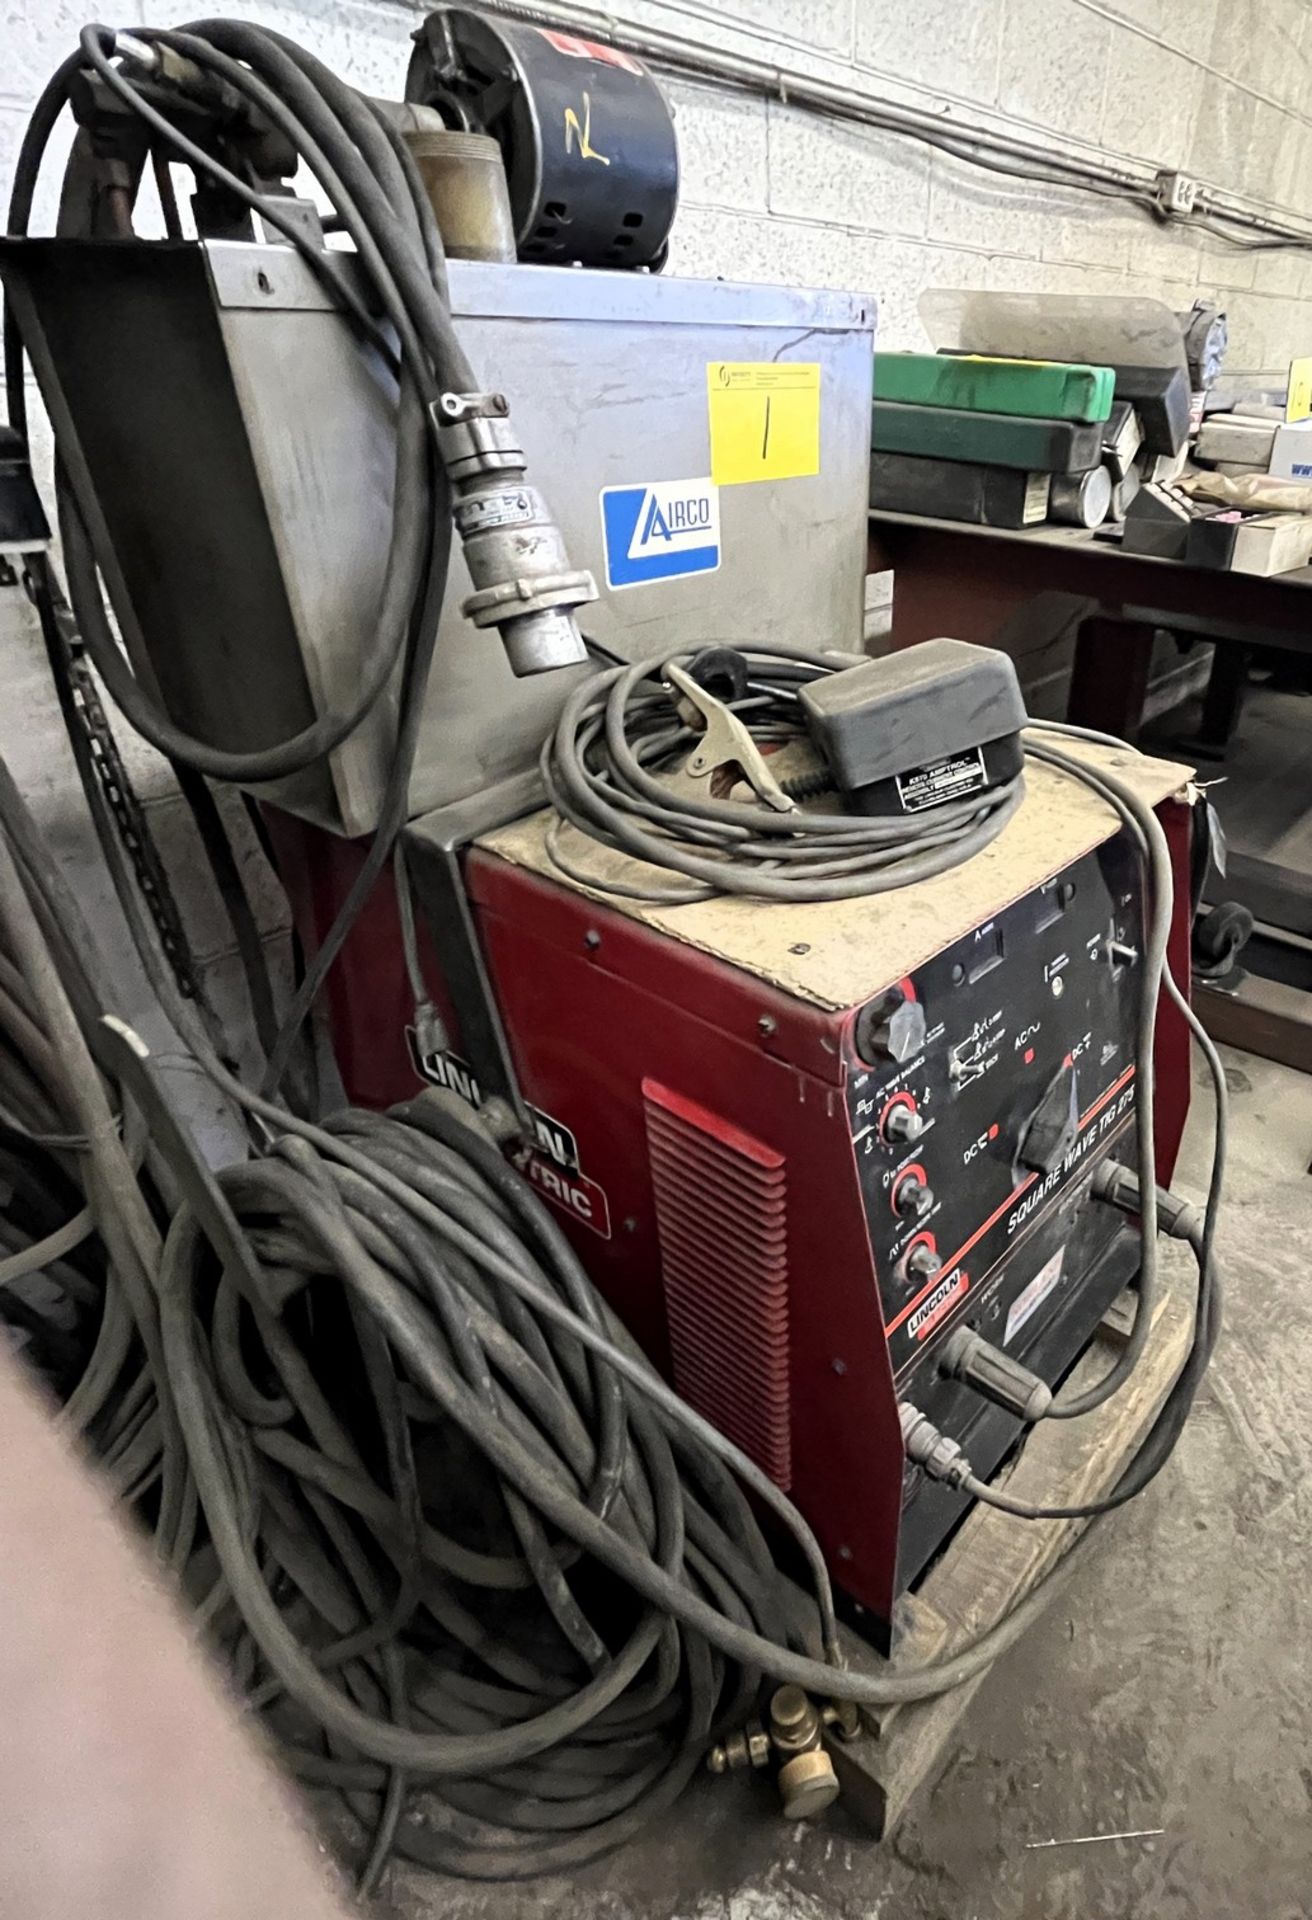 LINCOLN ELECTRIC SQUARE WAVE TIG 275 WELDER W/ AIRCO COOLING UNIT, CABLES, ETC. (NO TANKS) - Image 2 of 5